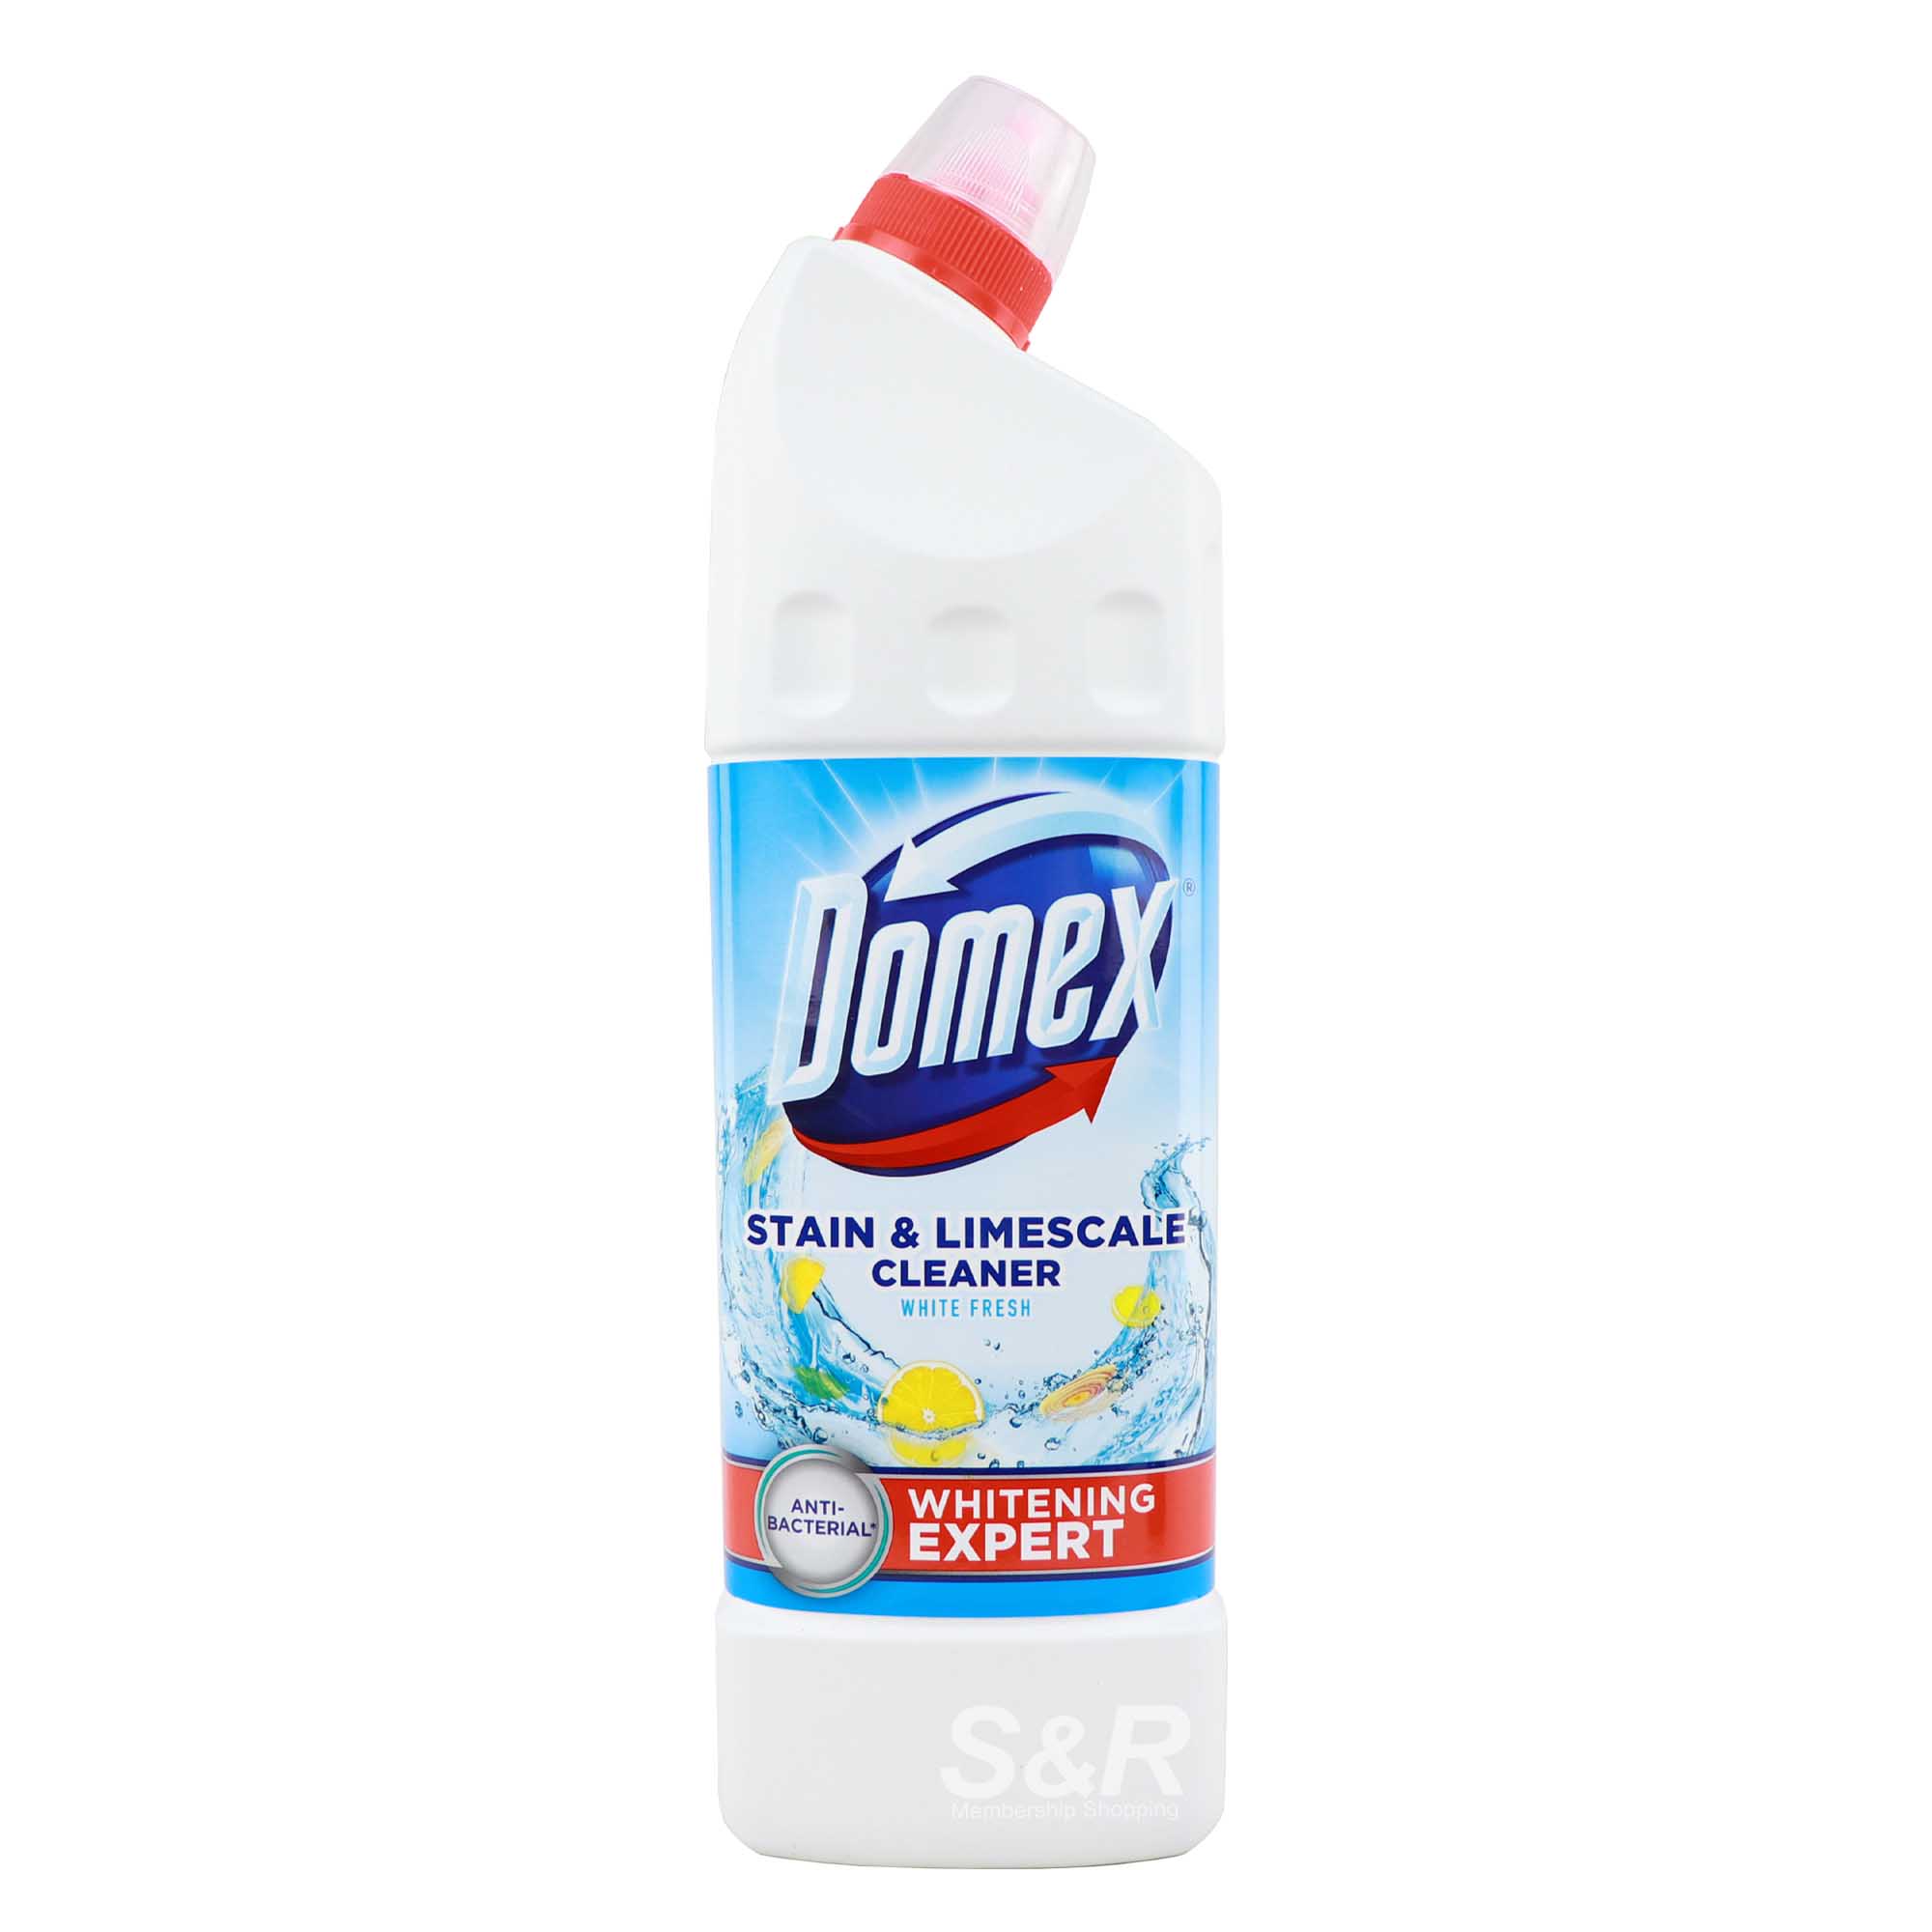 Domex Stain and Limescale Cleaner White Fresh 880mL